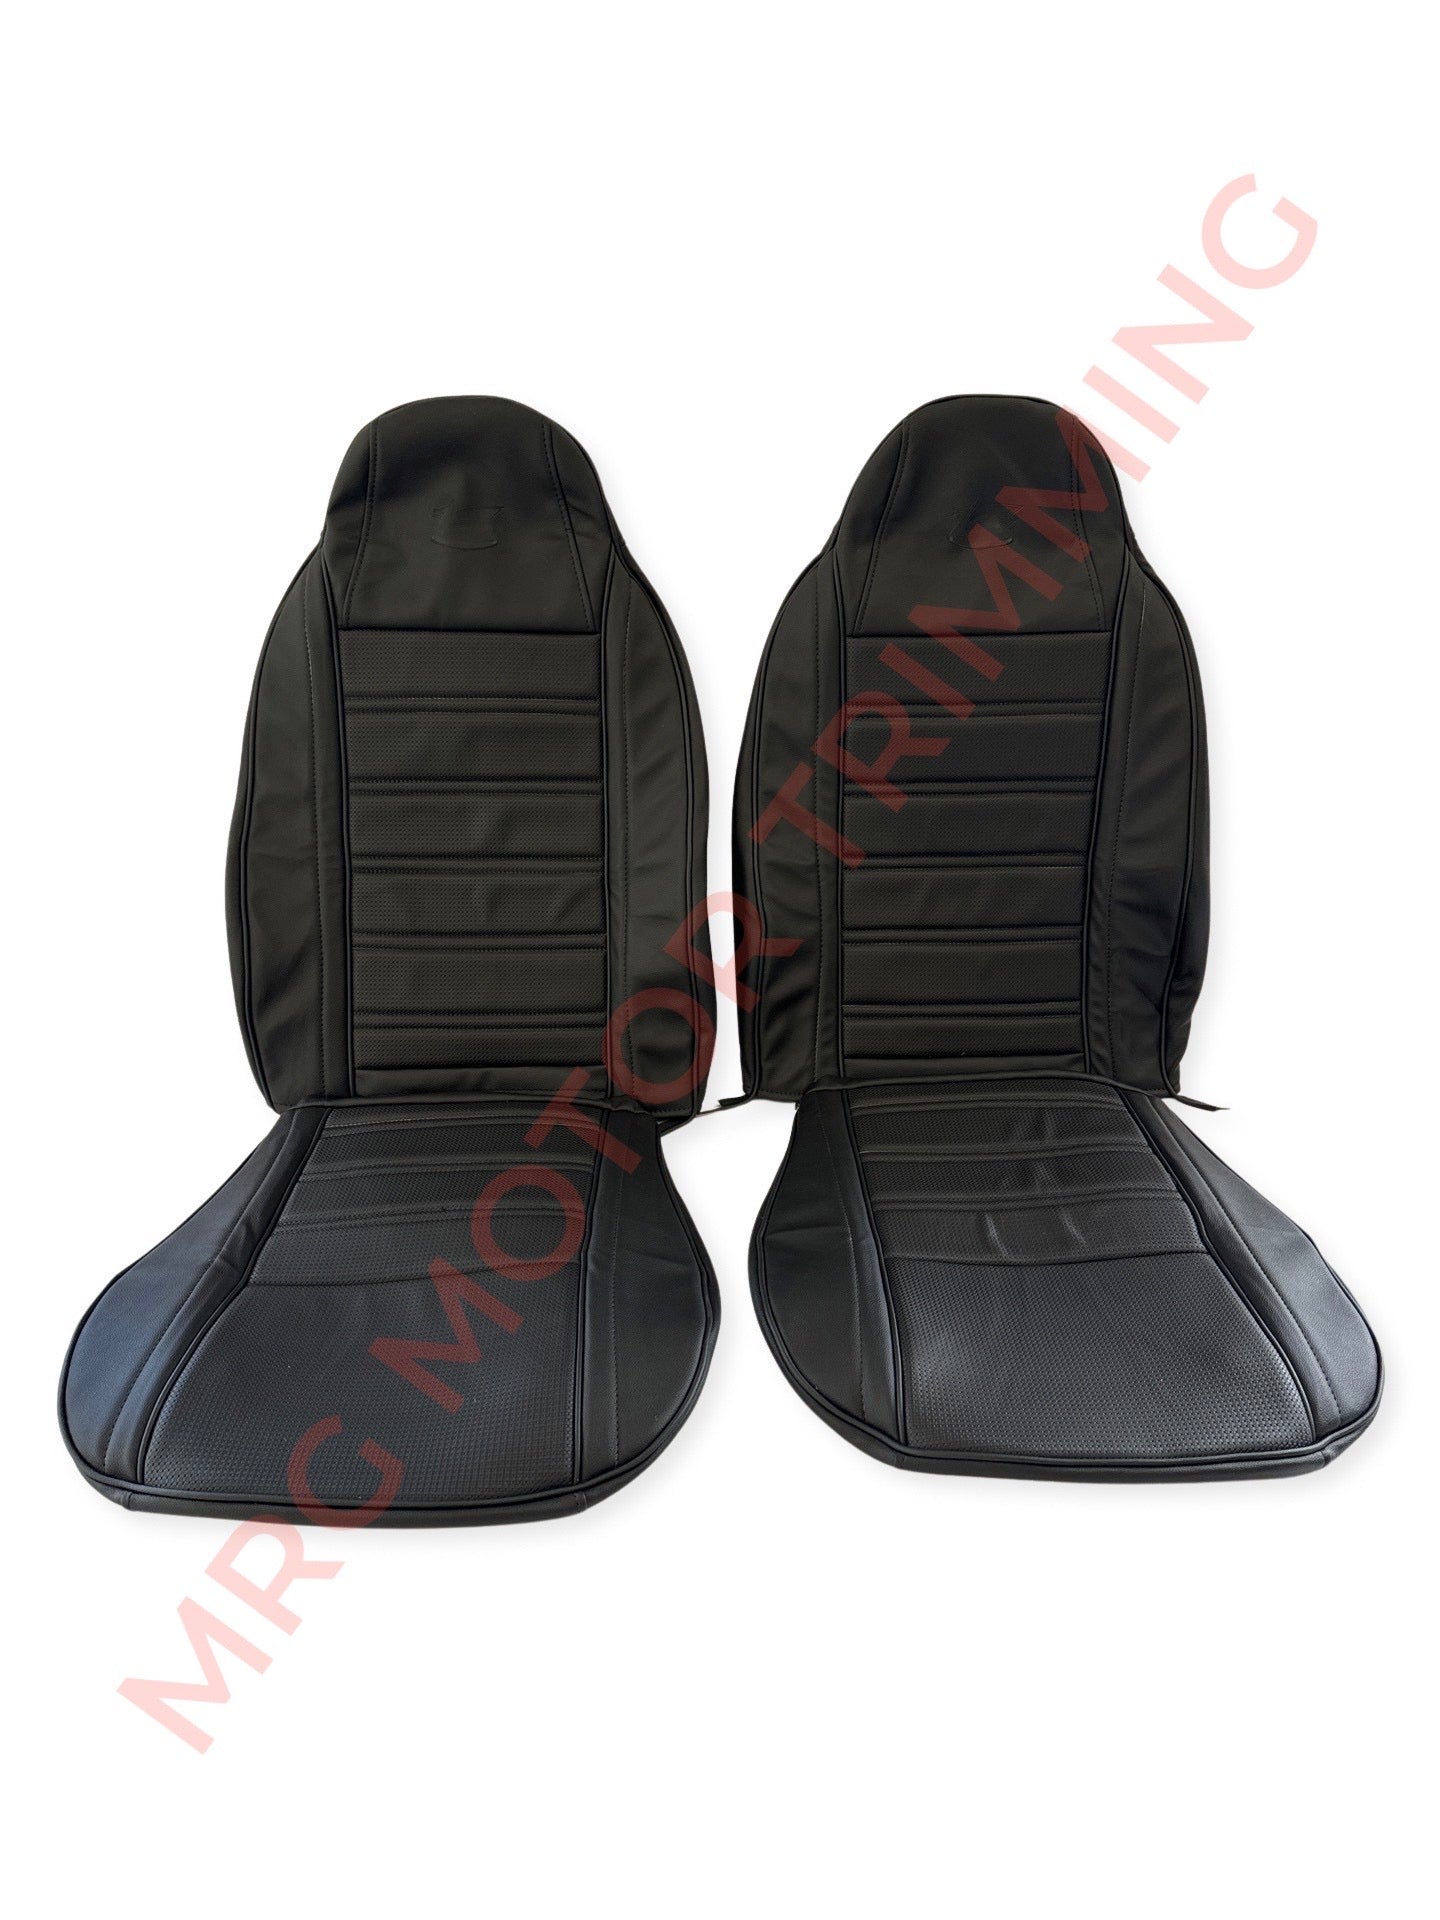 Toyota Celica RA23 Seat Skins Permanent Seat Covers